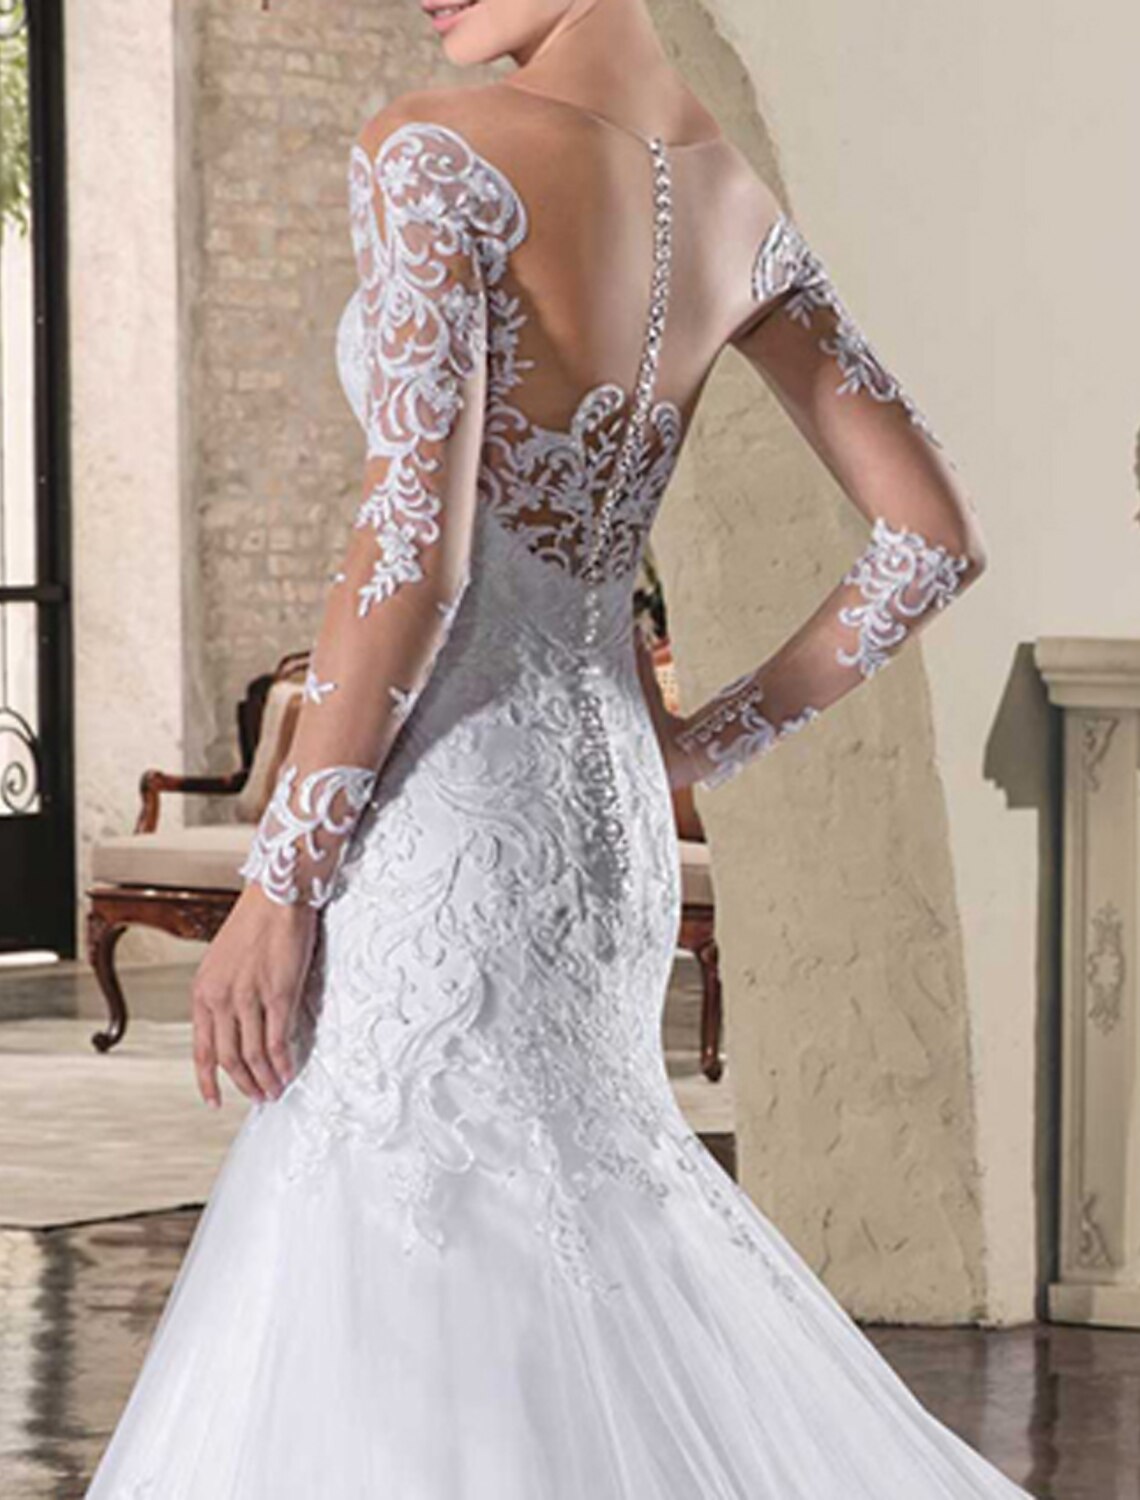 Engagement Open Back Formal Wedding Dresses Mermaid / Trumpet Illusion Neck Long Sleeve Court Train Lace Bridal Gowns With Appliques